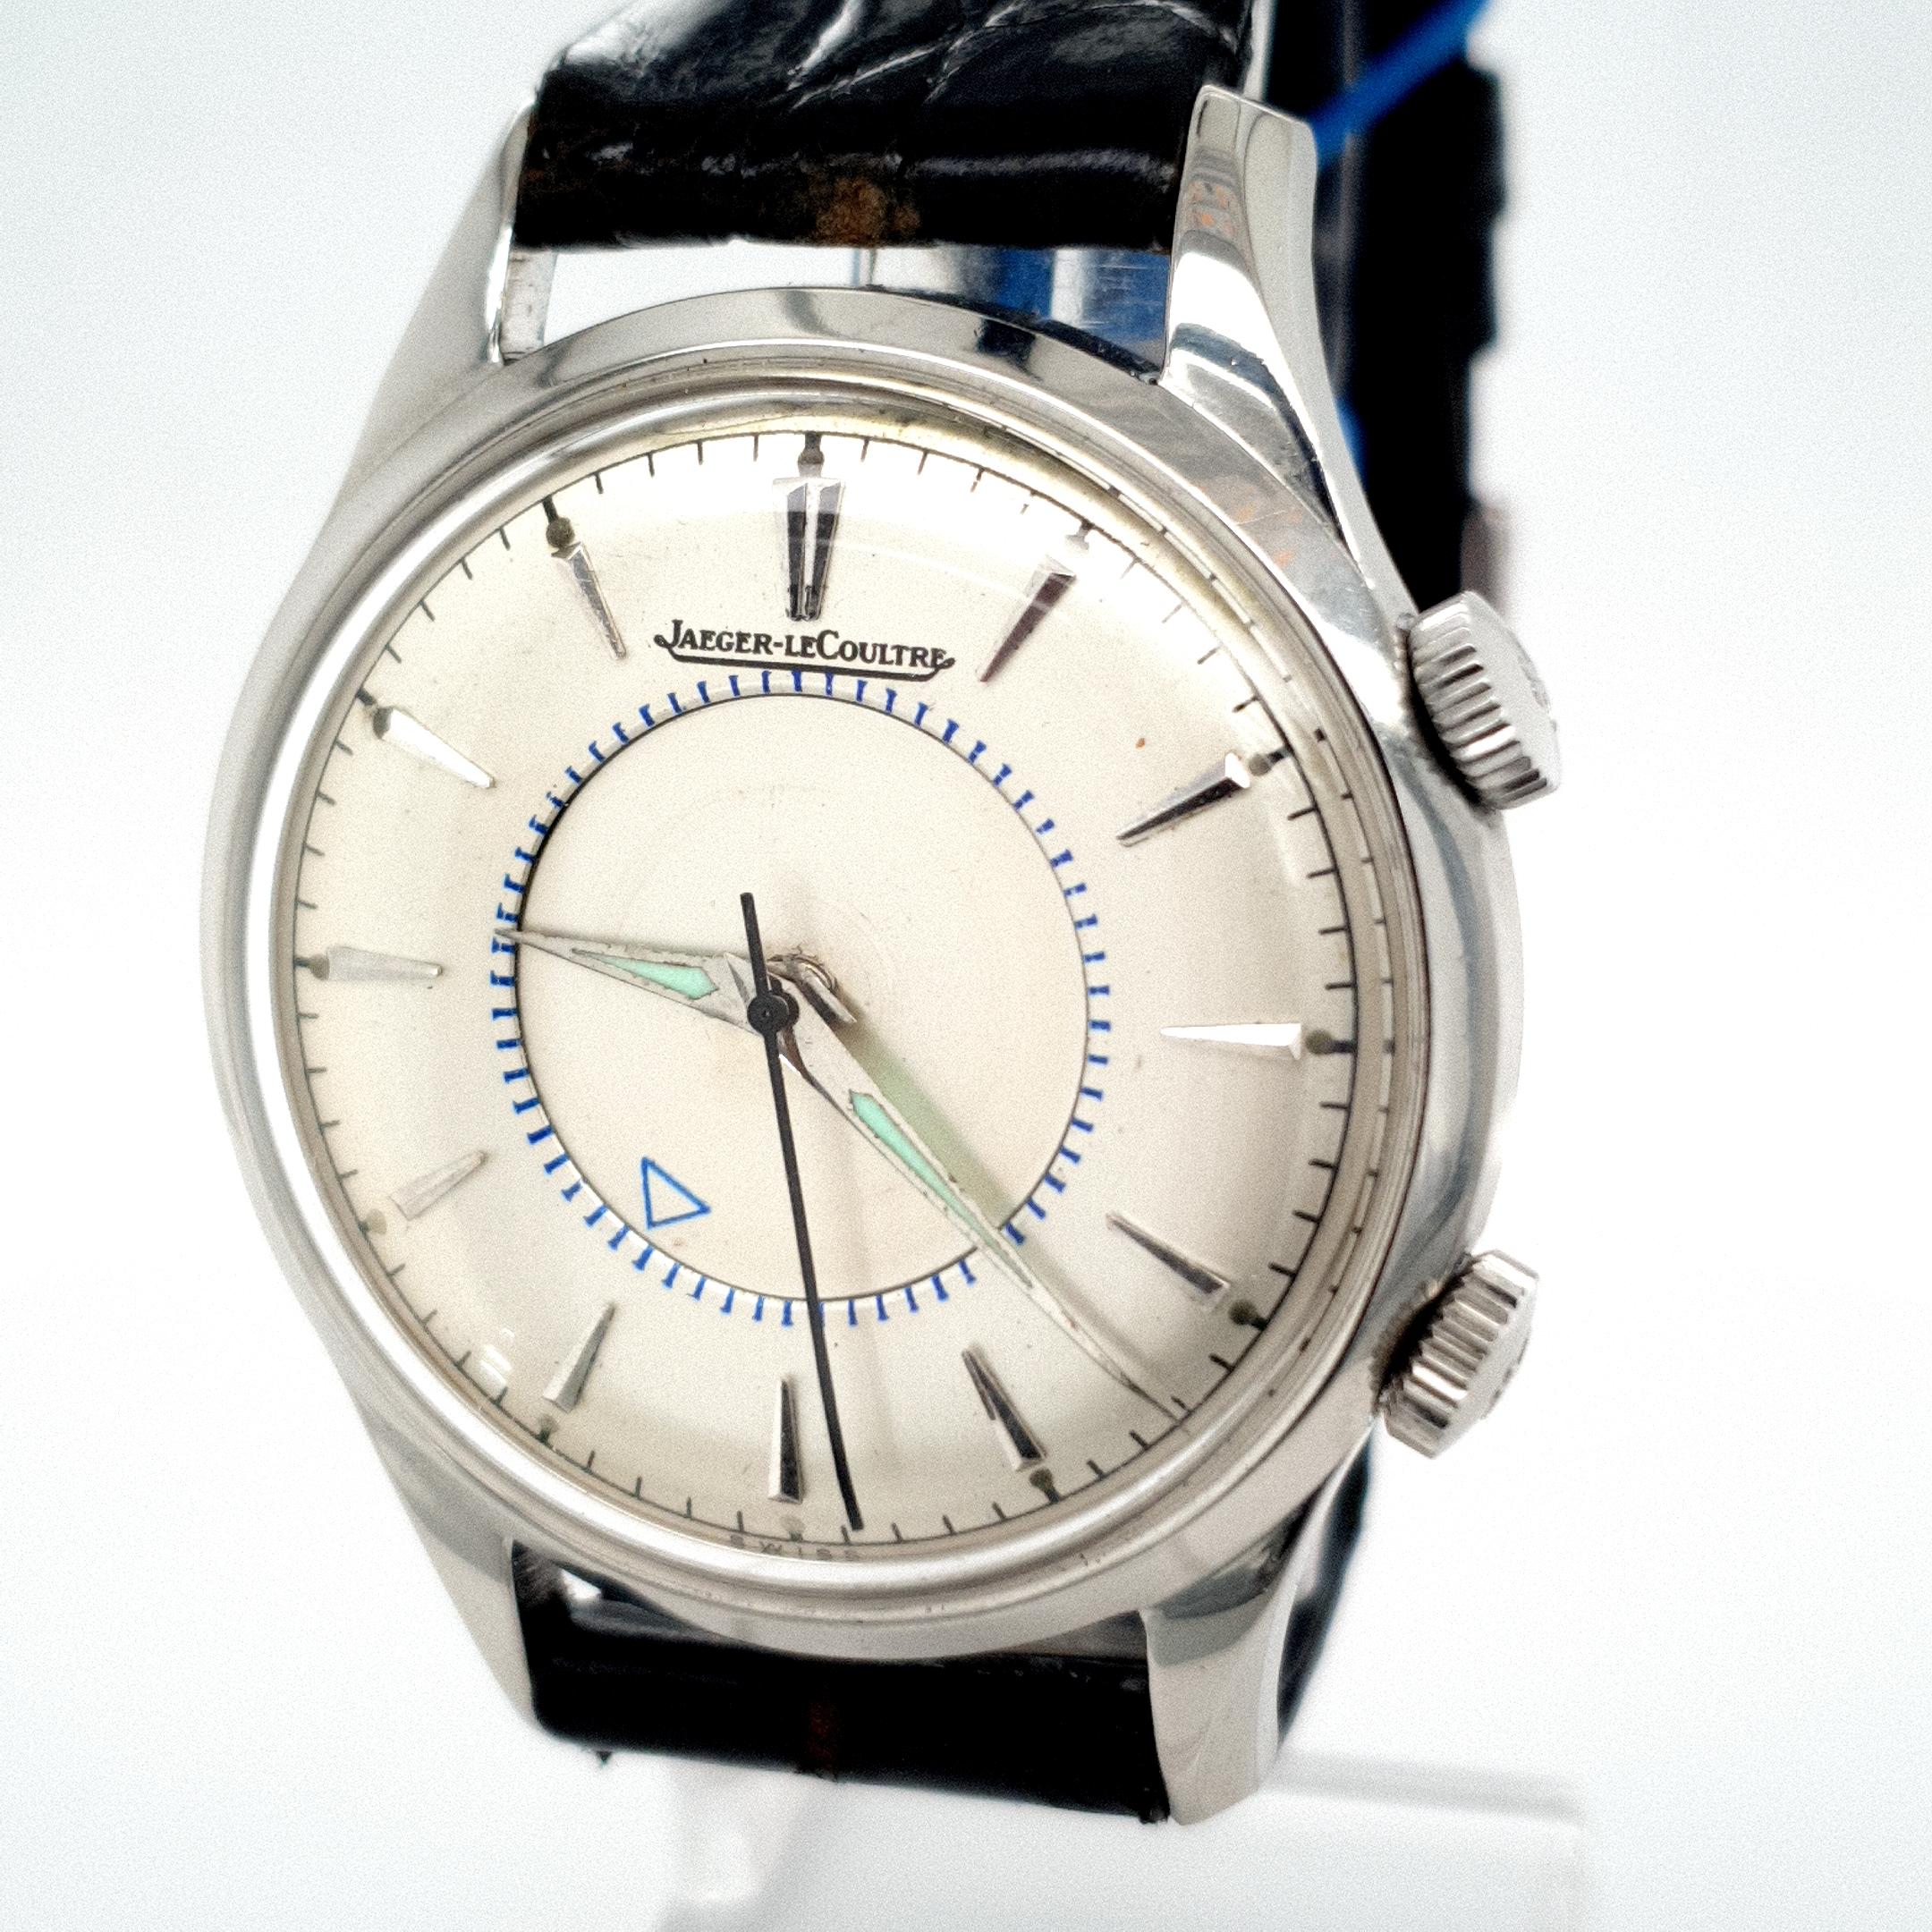 Beautiful extremely rare Jaeger-LeCoultre - Wrist alarm - Memovox

Condition : Very nice condition

Movement: Mechanical - manual handwinding

Functions: Hours, minutes, seconds, alarm

Case: Stainless steel - dimensions: length: 44.5 mm, width: